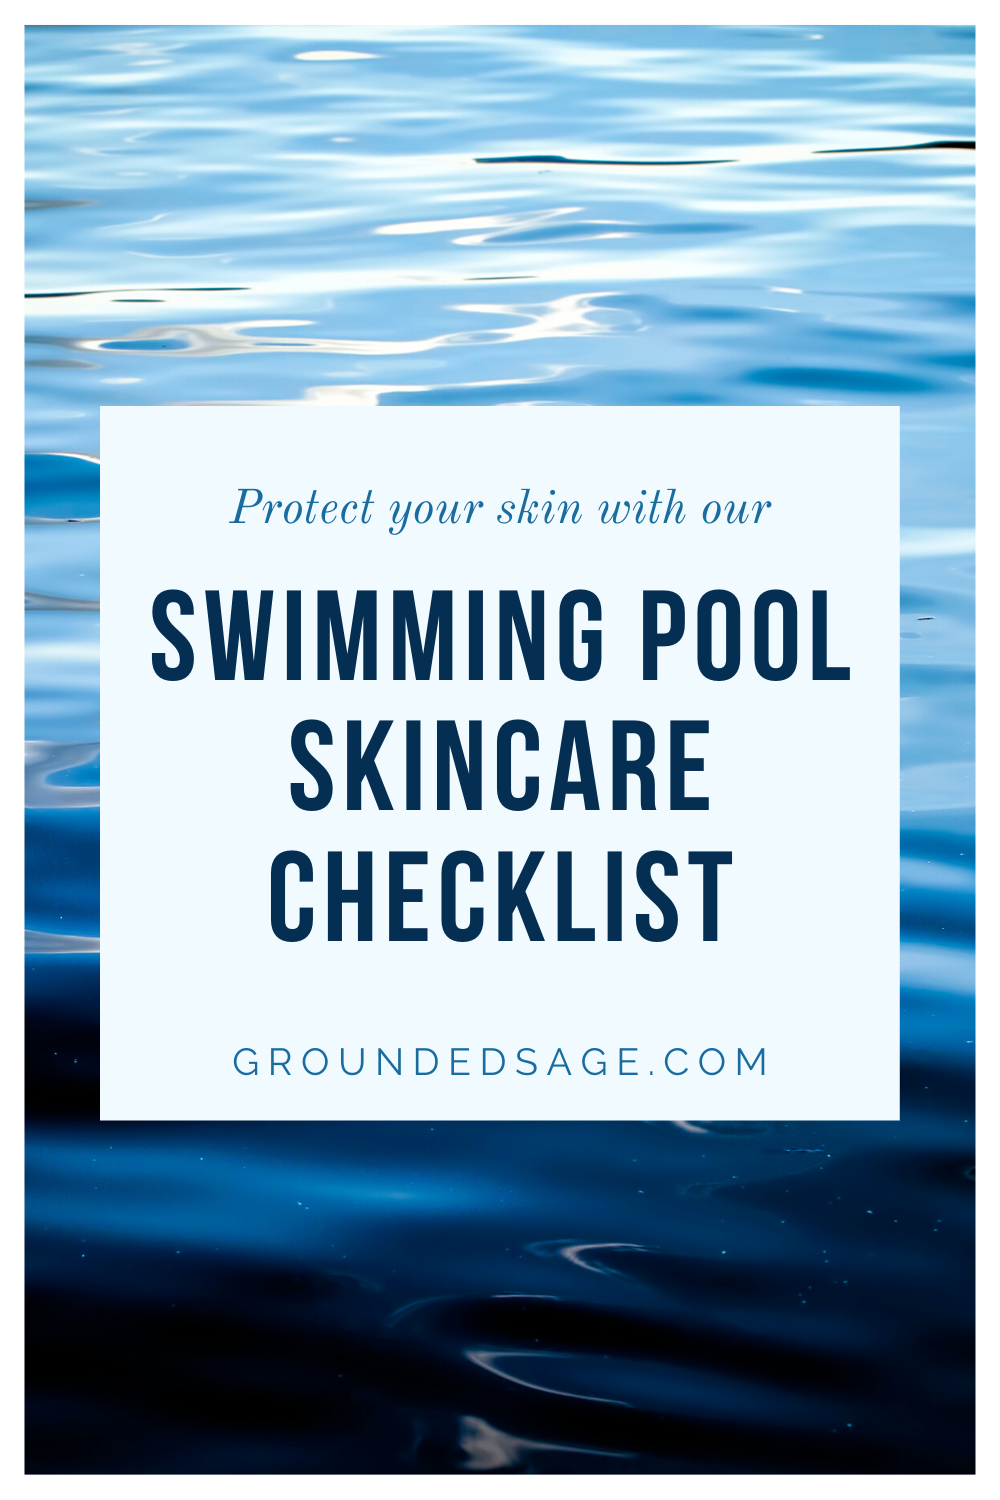 Swimming Pool Skincare Checklist For Your Face - the facial skin care steps to take after swimming in a chlorinated pool this summer. Keep your skin healthy with this step by step routine and checklist.